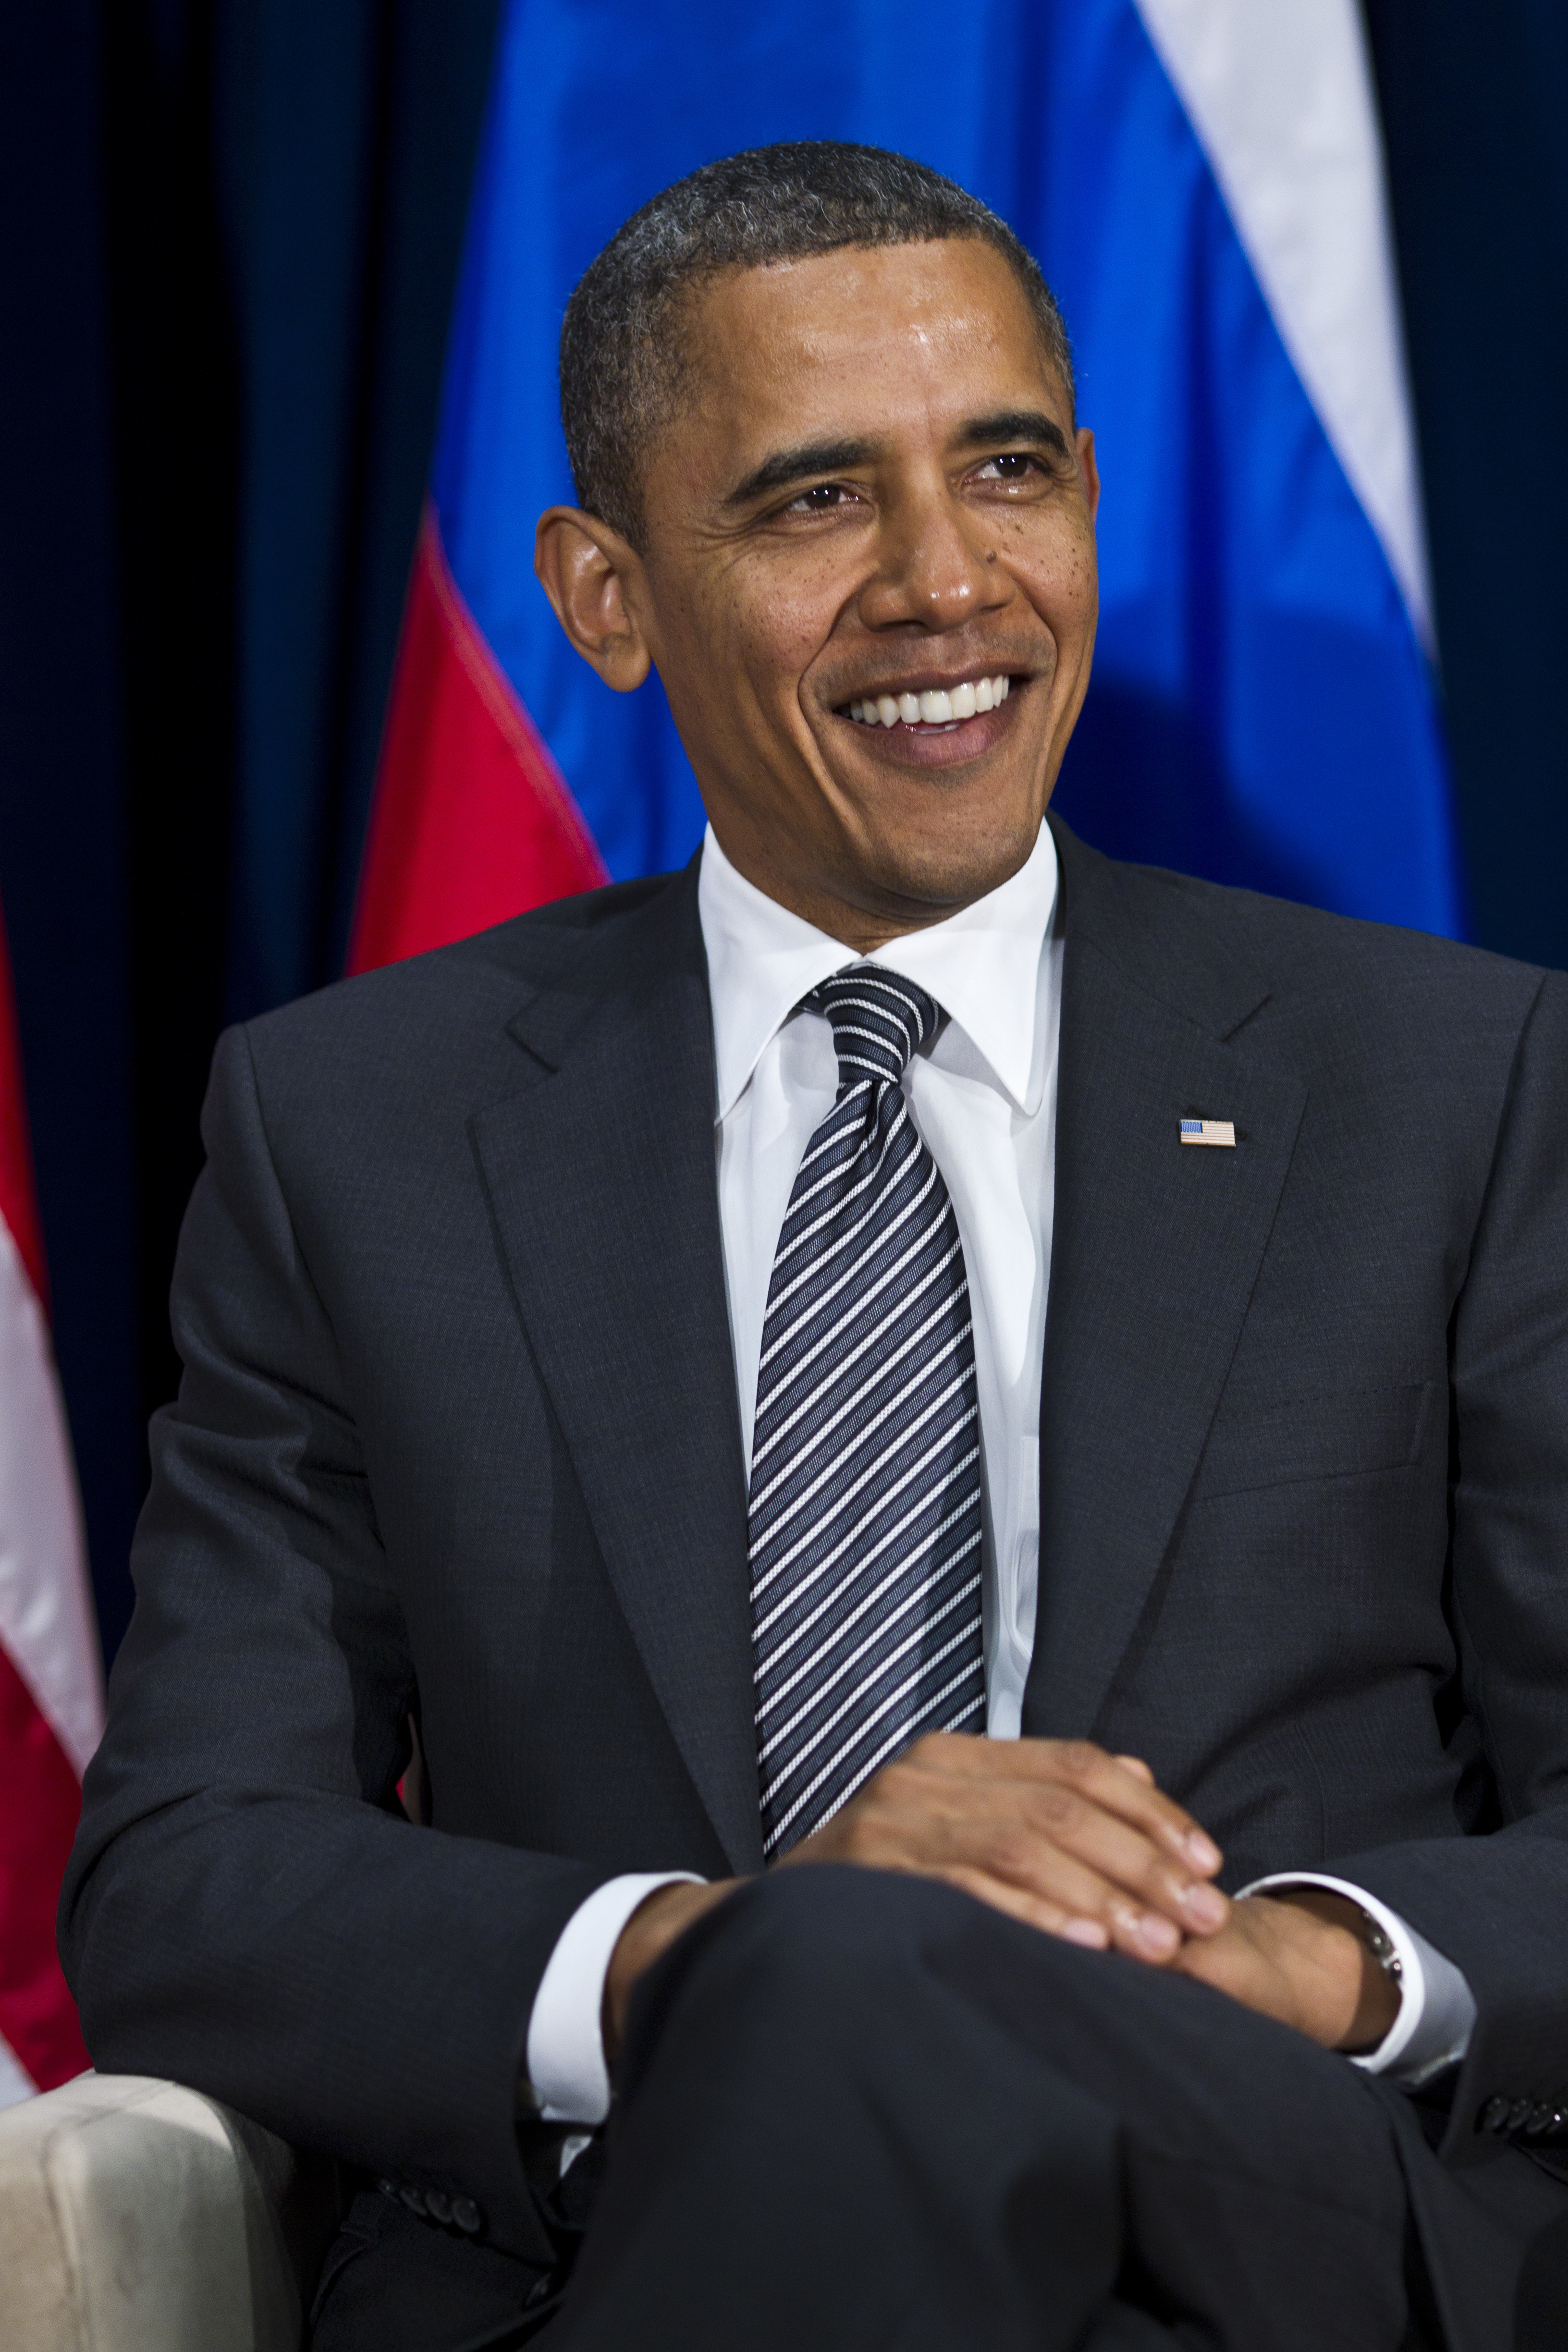 Barack Obama smiling, seated in a dark suit, white shirt, and diagonally striped tie